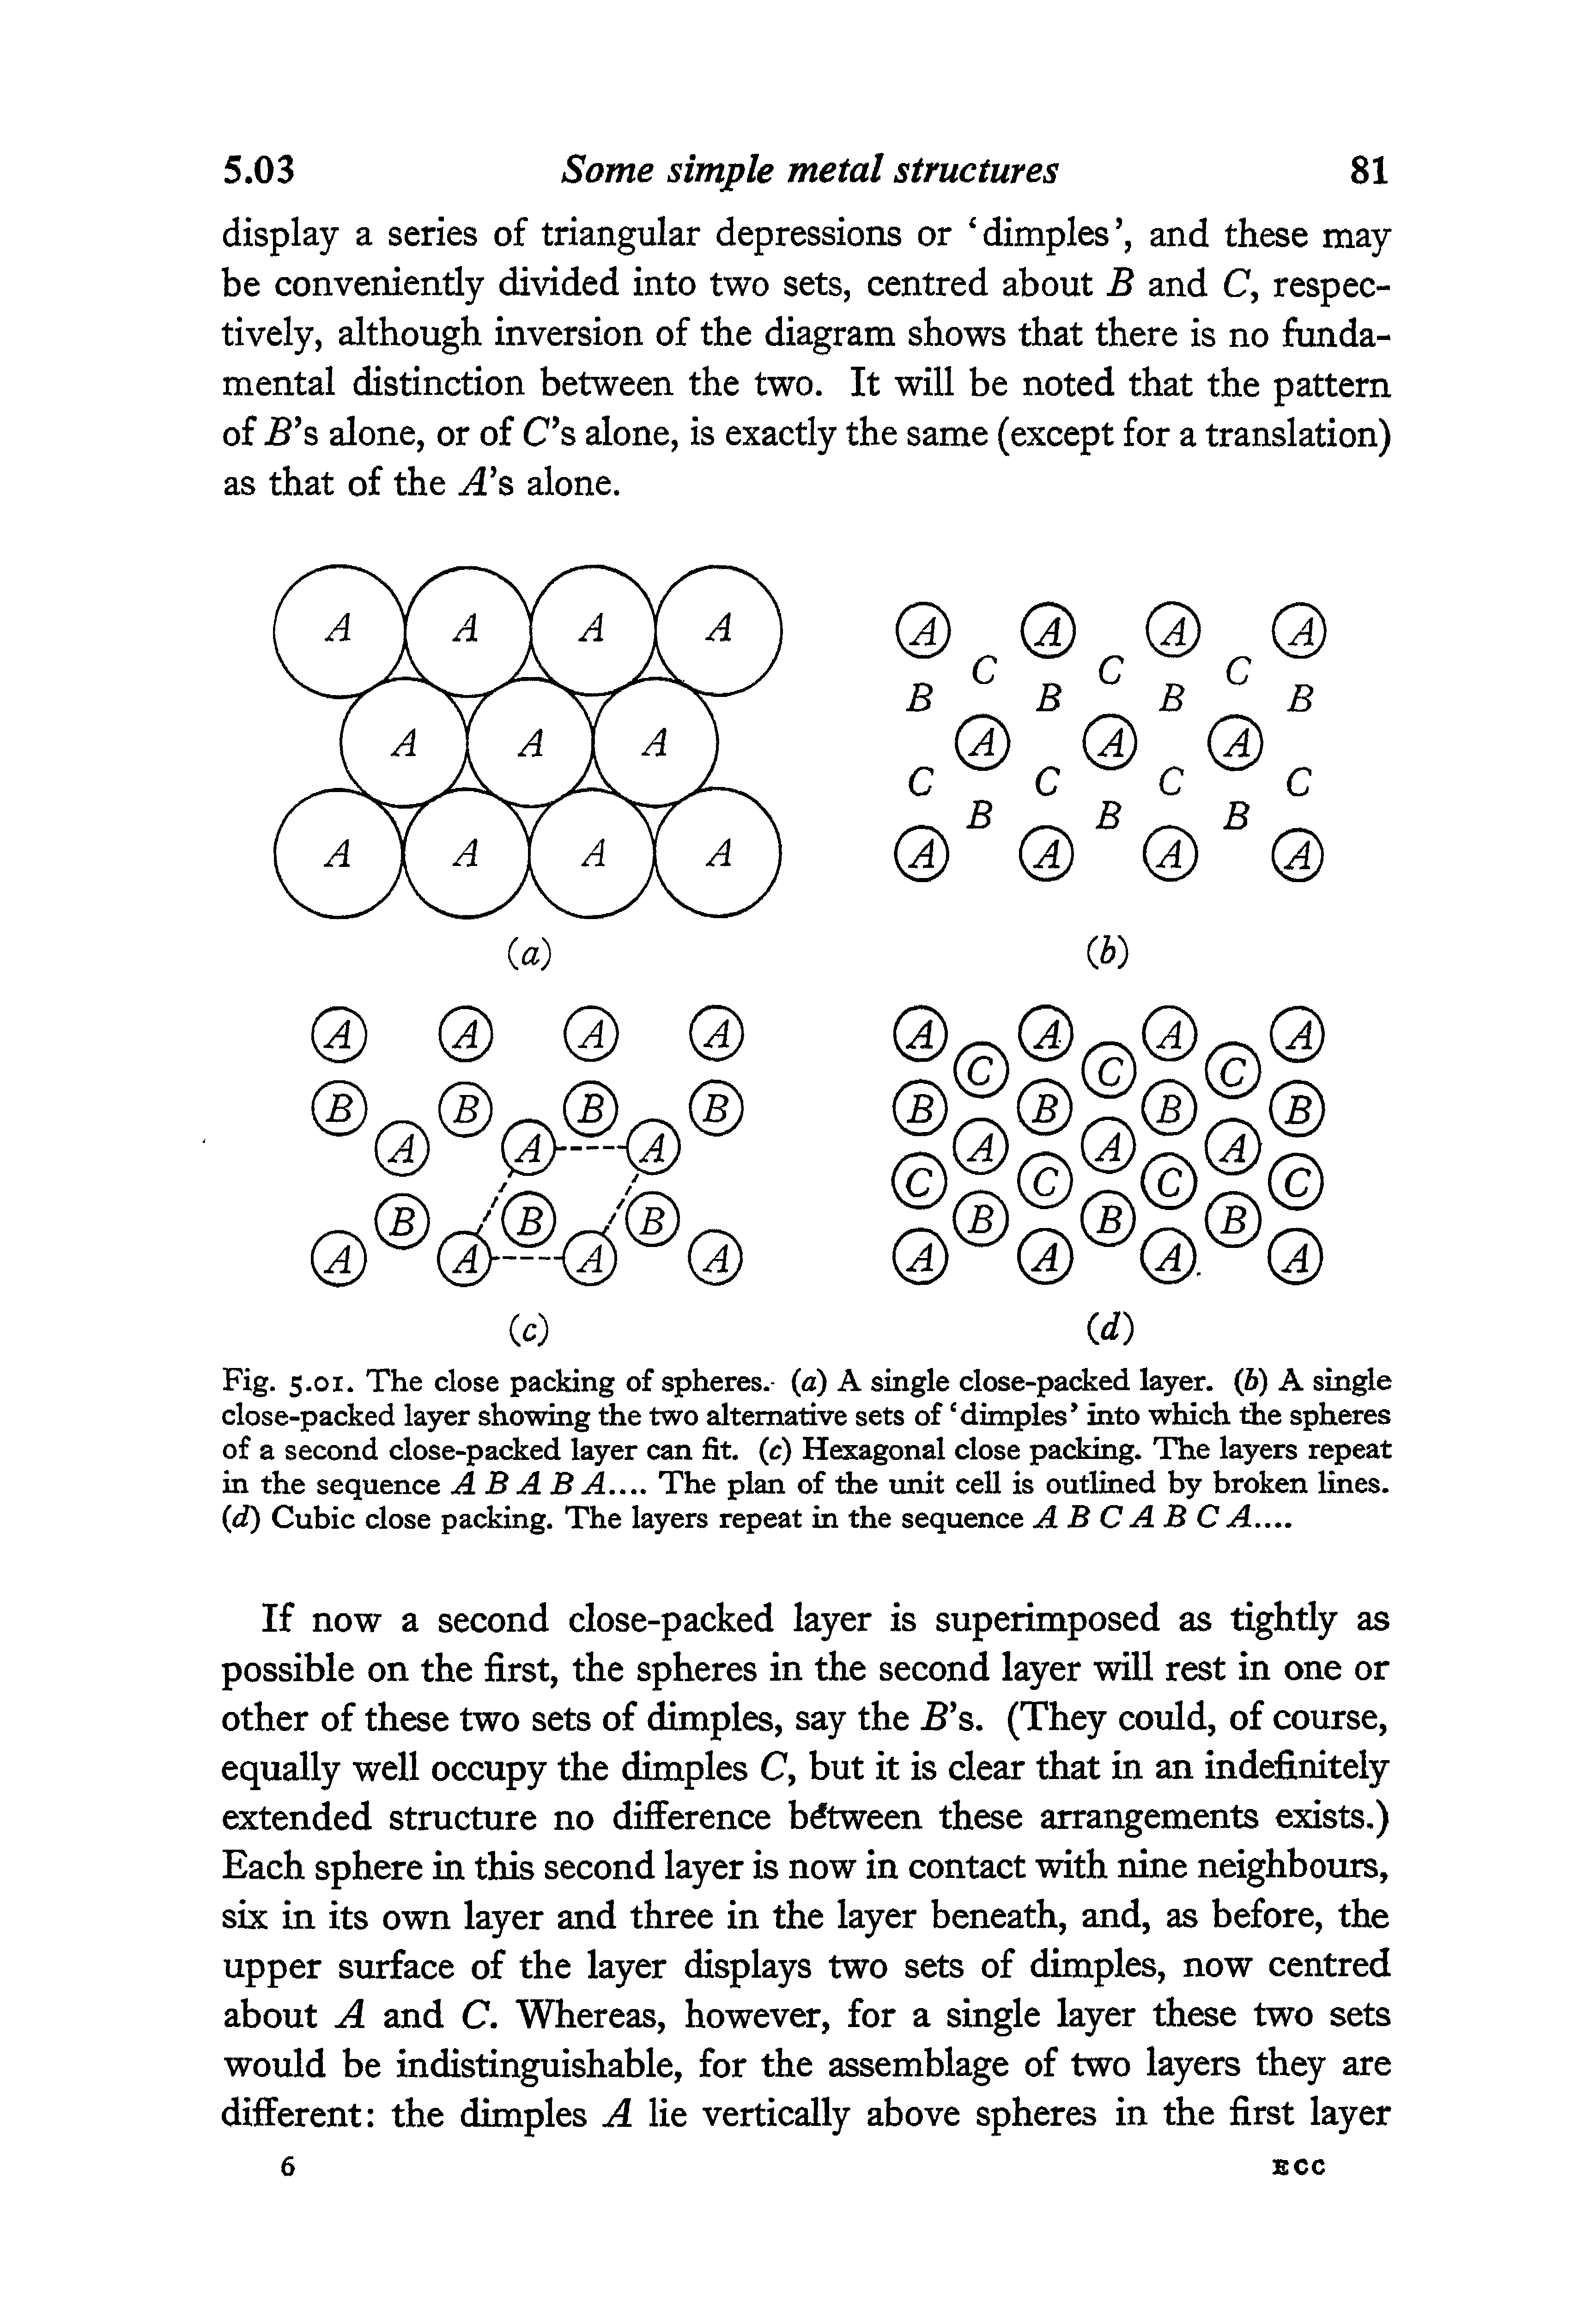 Fig. 5.01. The close packing of spheres, (a) A single close-packed layer. (b) A single close-packed layer showing the two alternative sets of dimples into which the spheres of a second close-packed layer can fit. (c) Hexagonal close packing. The layers repeat in the sequence ABABA. The plan of the unit cell is outlined by broken lines. (d) Cubic close packing. The layers repeat in the sequence A B C A B C A.